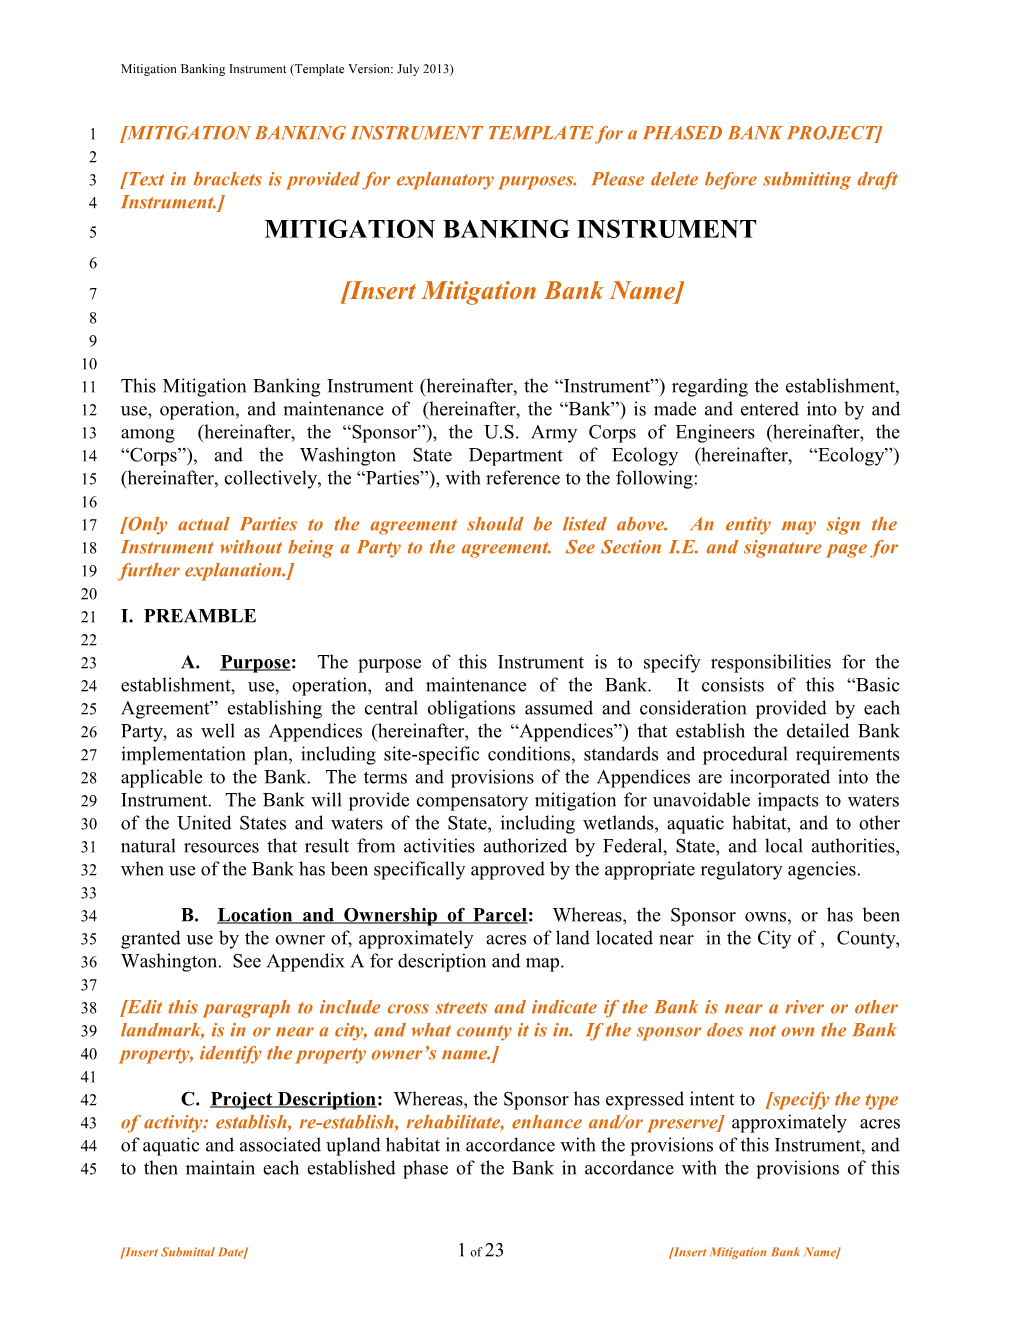 MITIGATION BANKING INSTRUMENT TEMPLATE for a PHASED BANK PROJECT